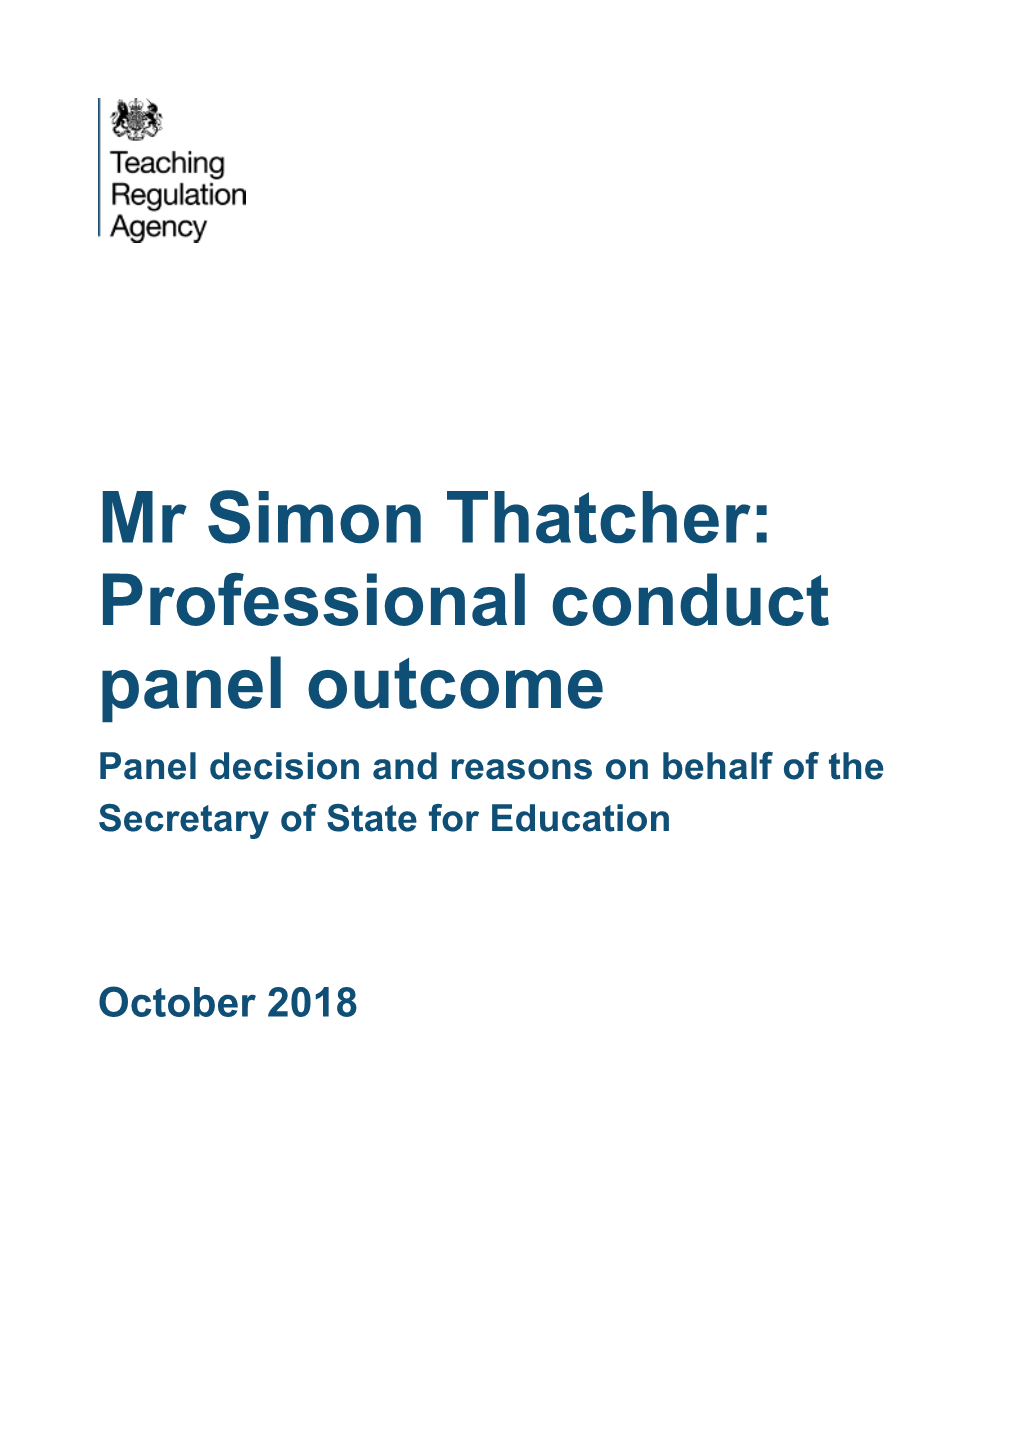 Mr Simon Thatcher: Professional Conduct Panel Outcome Panel Decision and Reasons on Behalf of the Secretary of State for Education